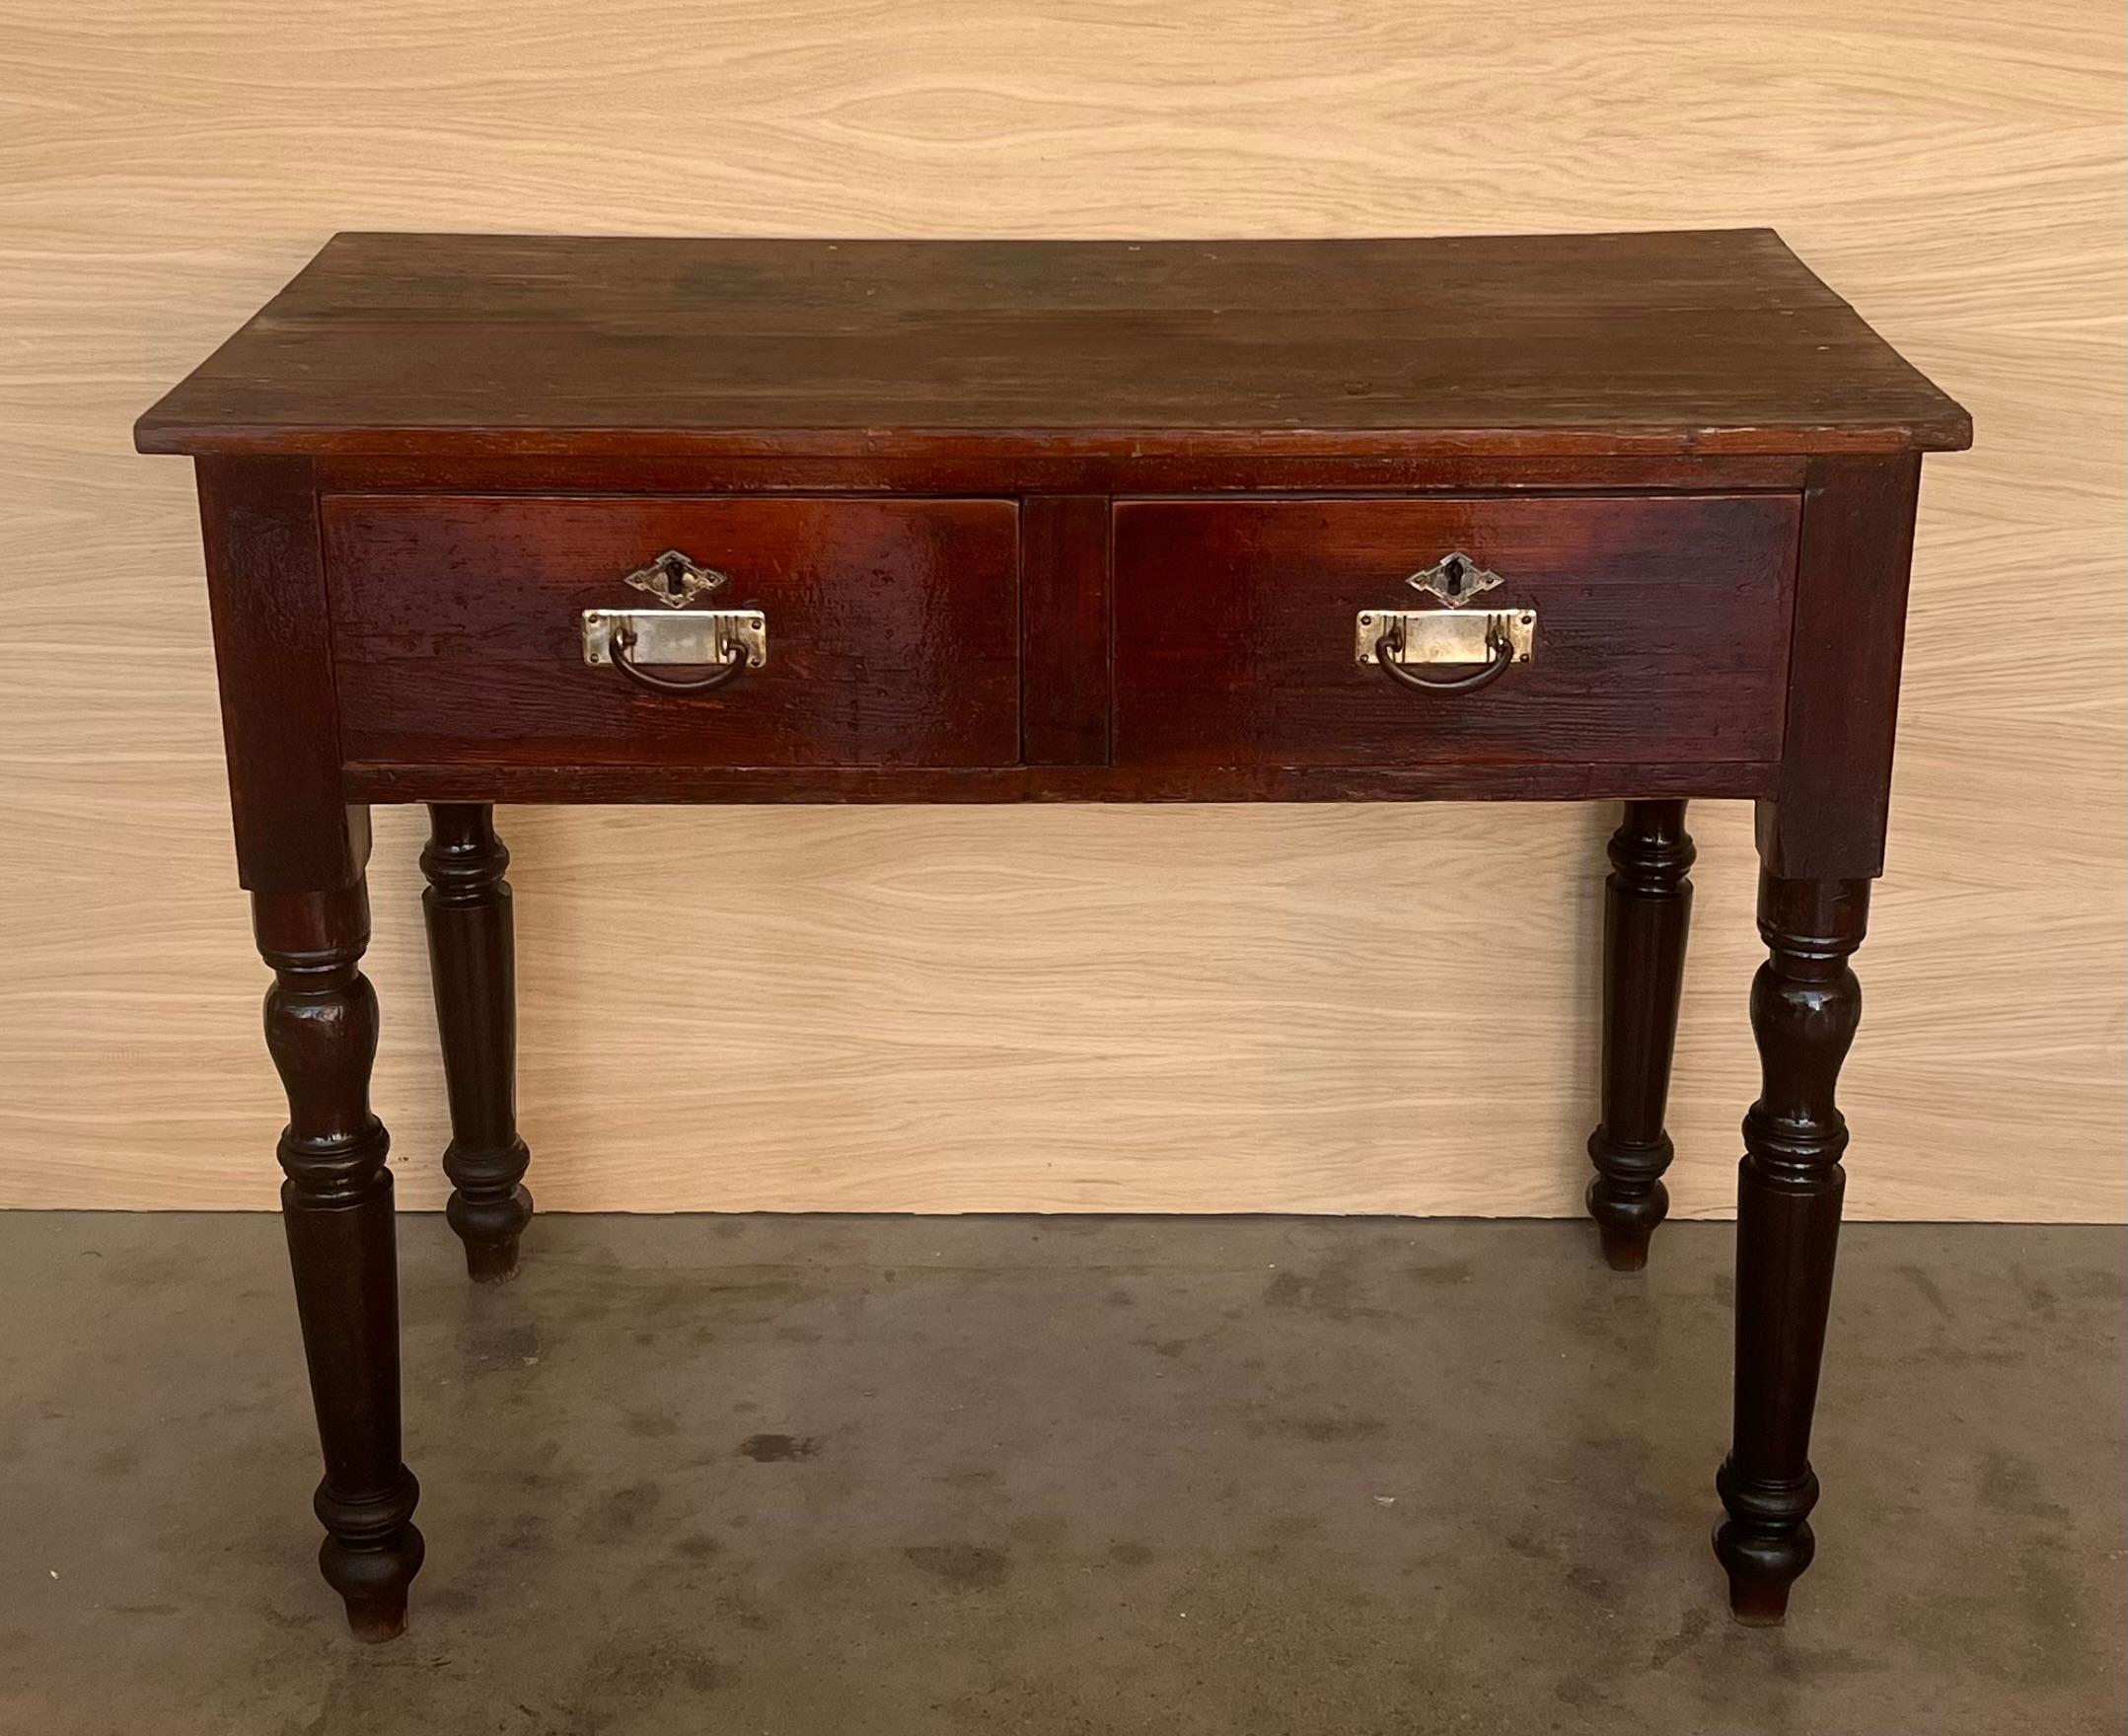 Spanish Country side table with drawer. Made of antique pine called 